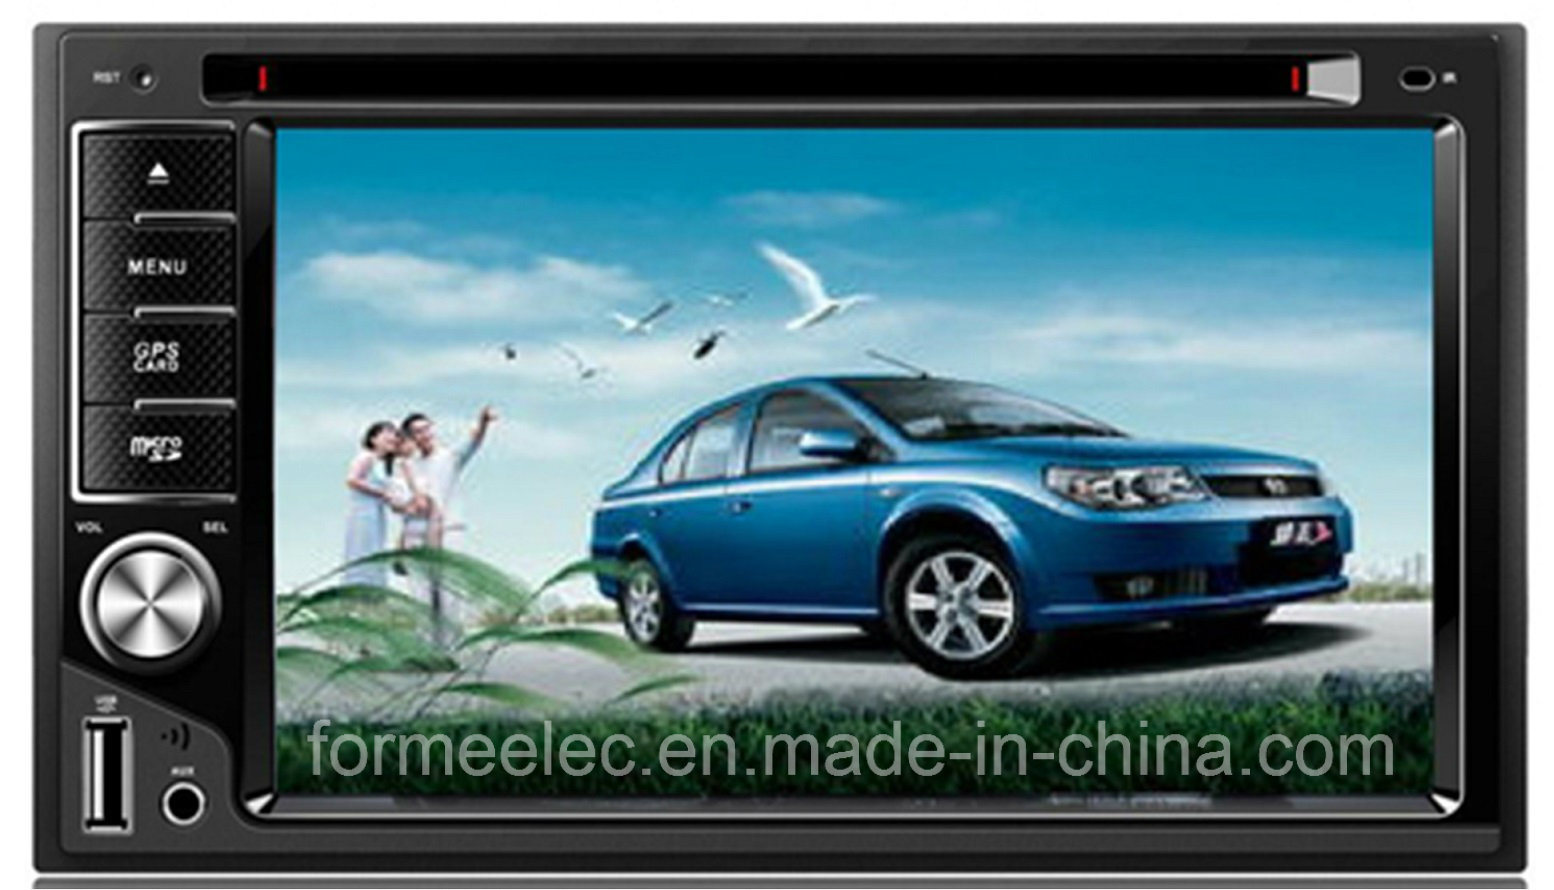 6.2inch 2 DIN Car DVD Player with USB Bluetooth SD